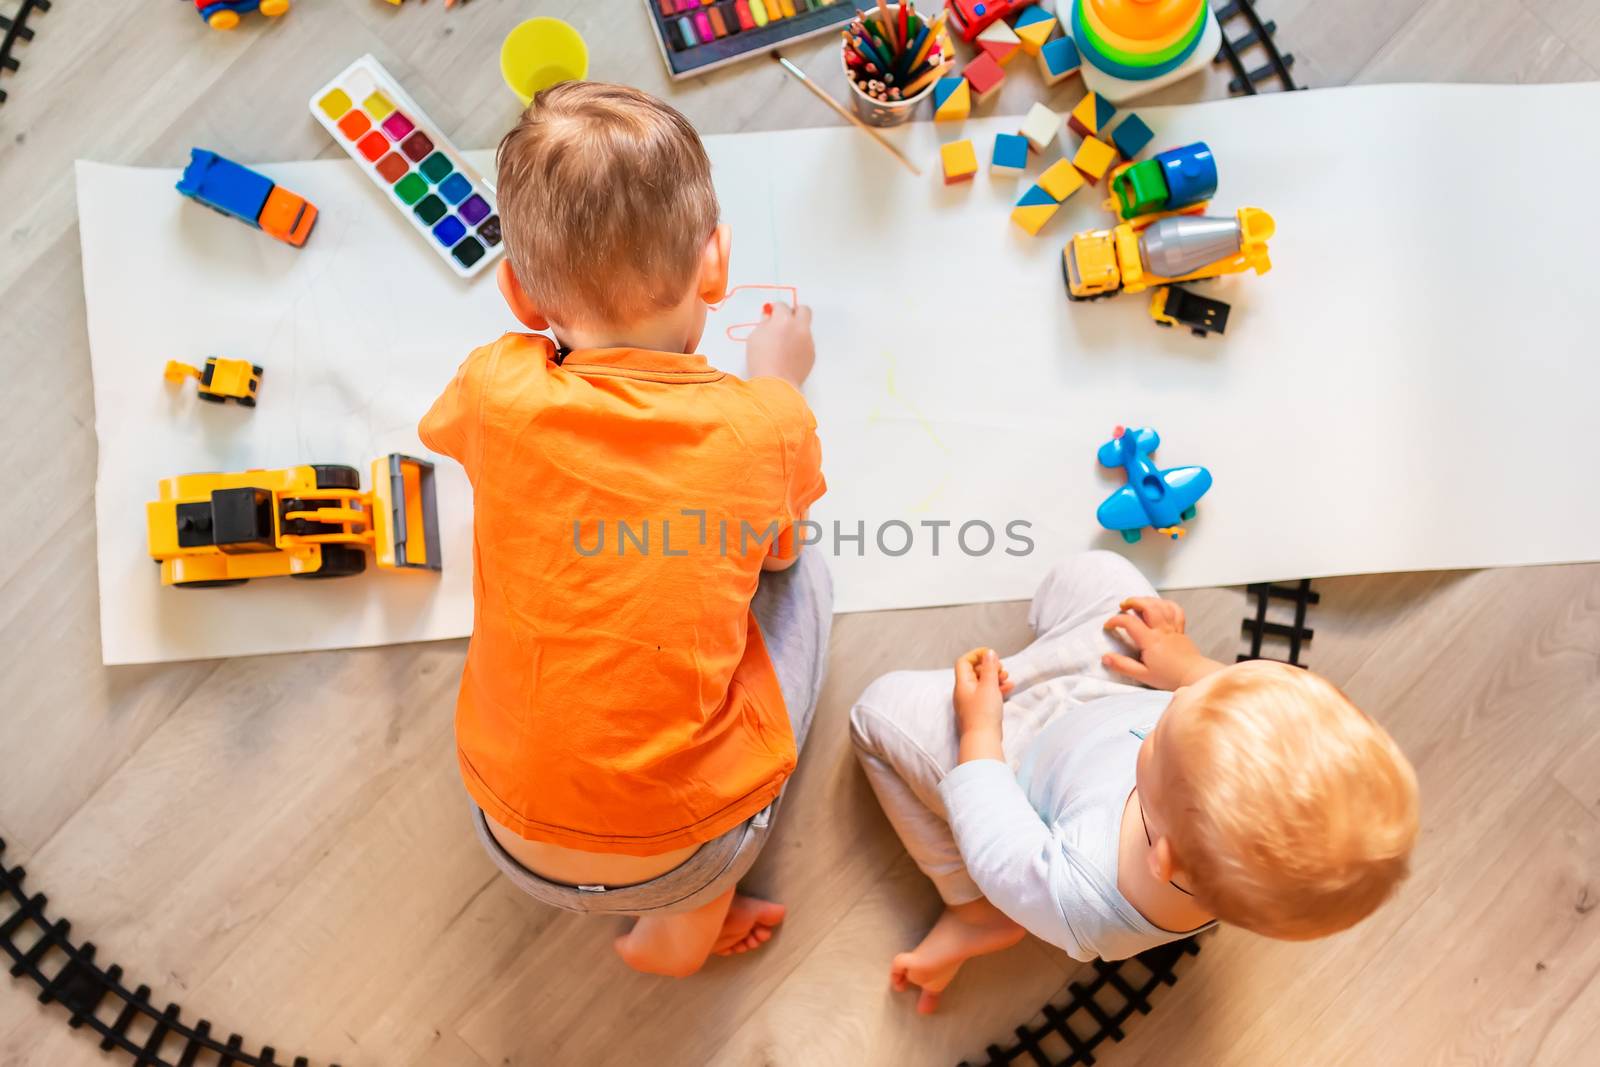 Preschool boys drawing on floor on paper, playing with educational toys - blocks, train, railroad, vehicles at home or daycare. Toys for preschool and kindergarten. Top view. Children's art and creativeness concept